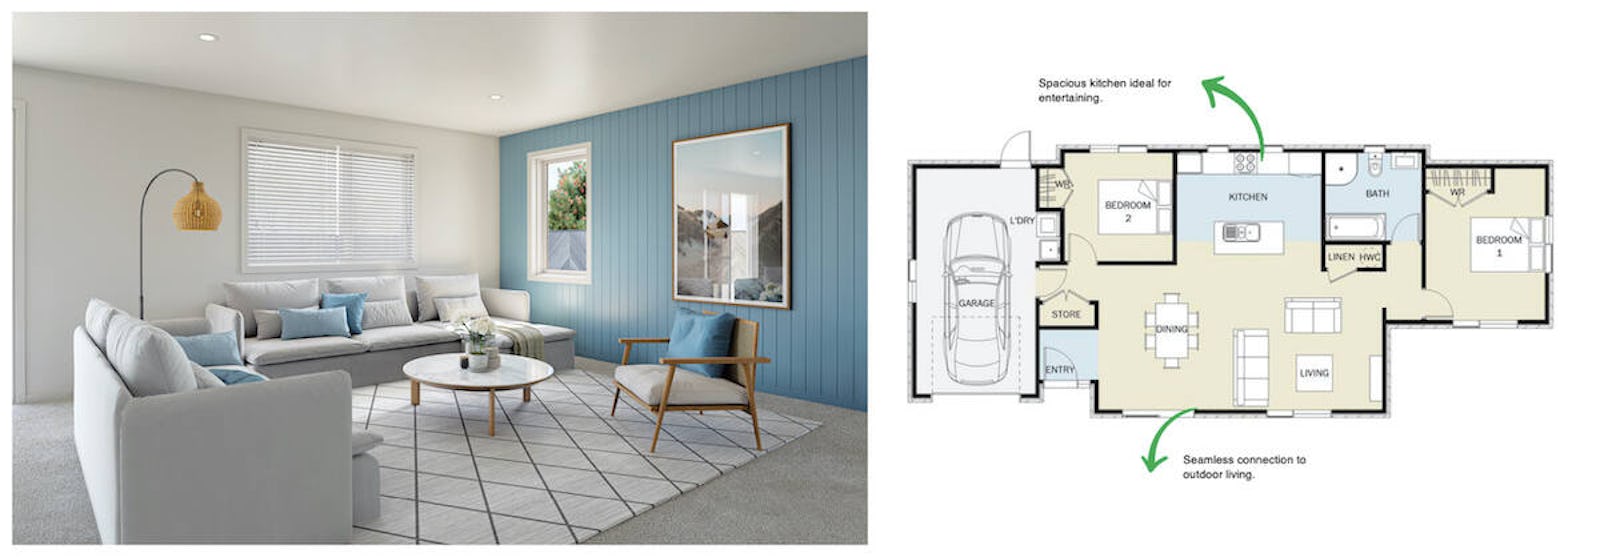 Smart and modern at its core our two bedroom Tui plan maximises space through a spacious open plan living area and dining area, while the kitchen creates a focal point.